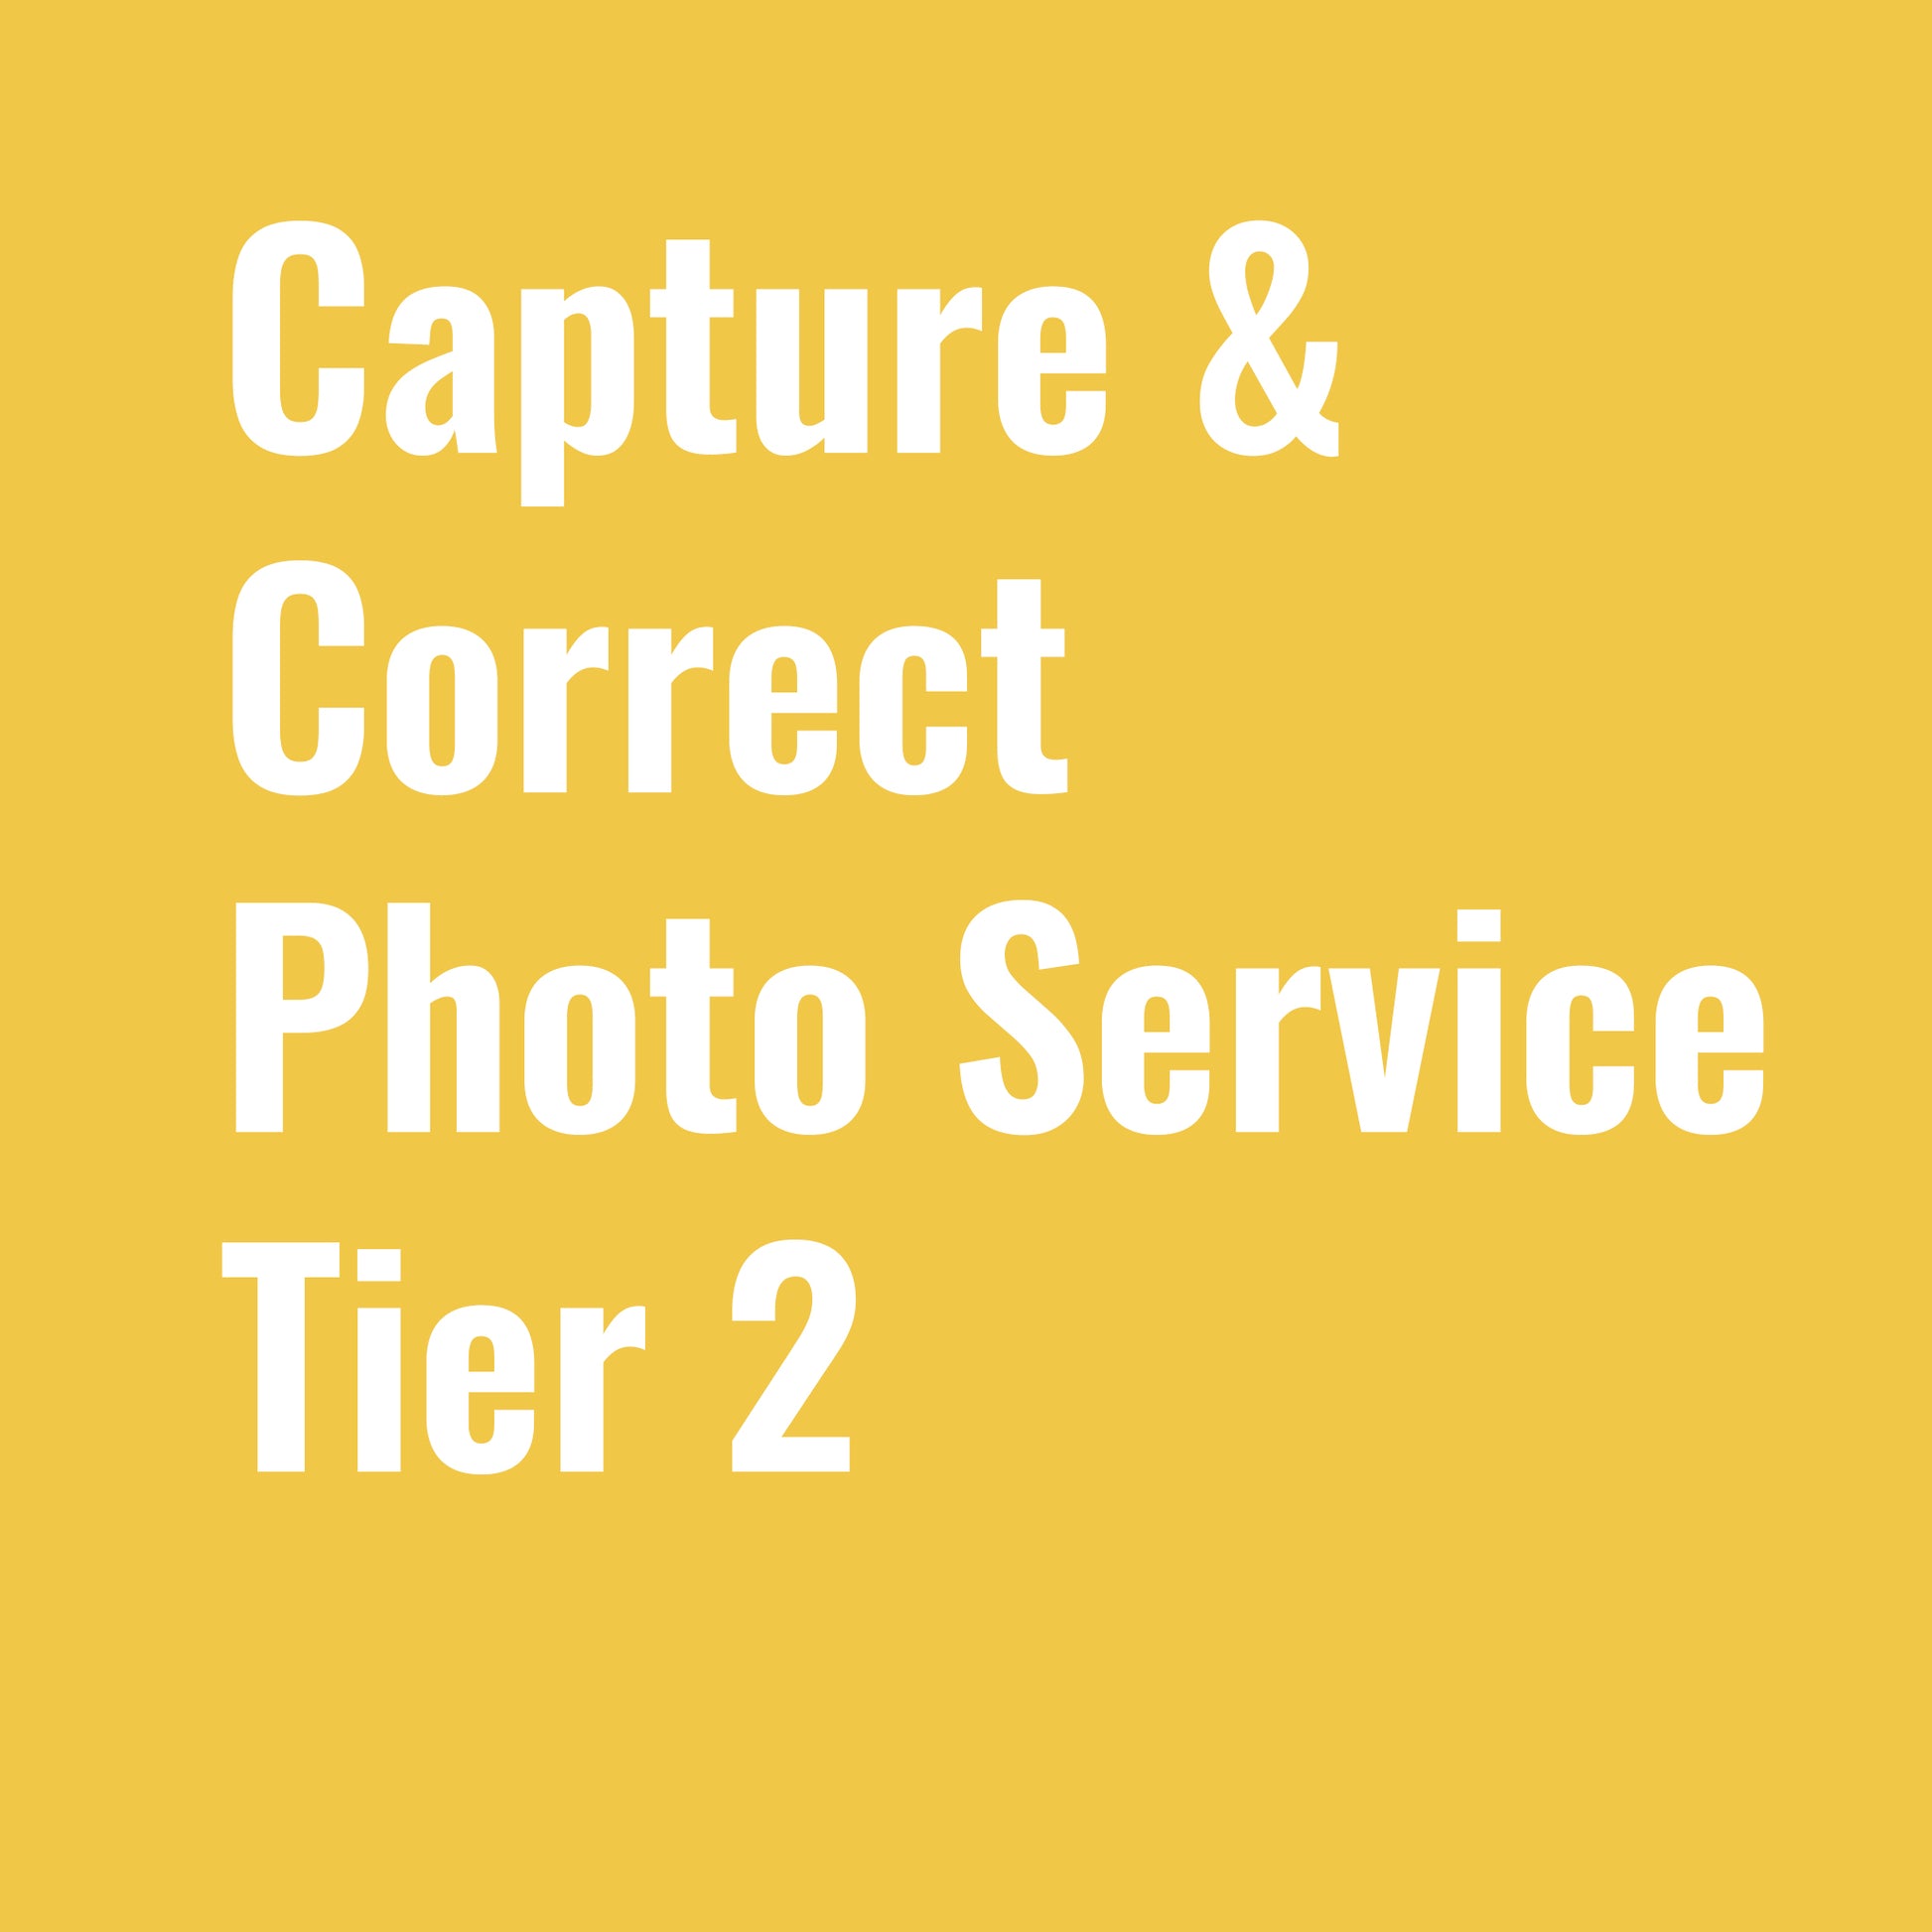 Photo Service Tier 2 - "Capture & Correct" - by K. A. Artist Shop Services - K. A. Artist Shop